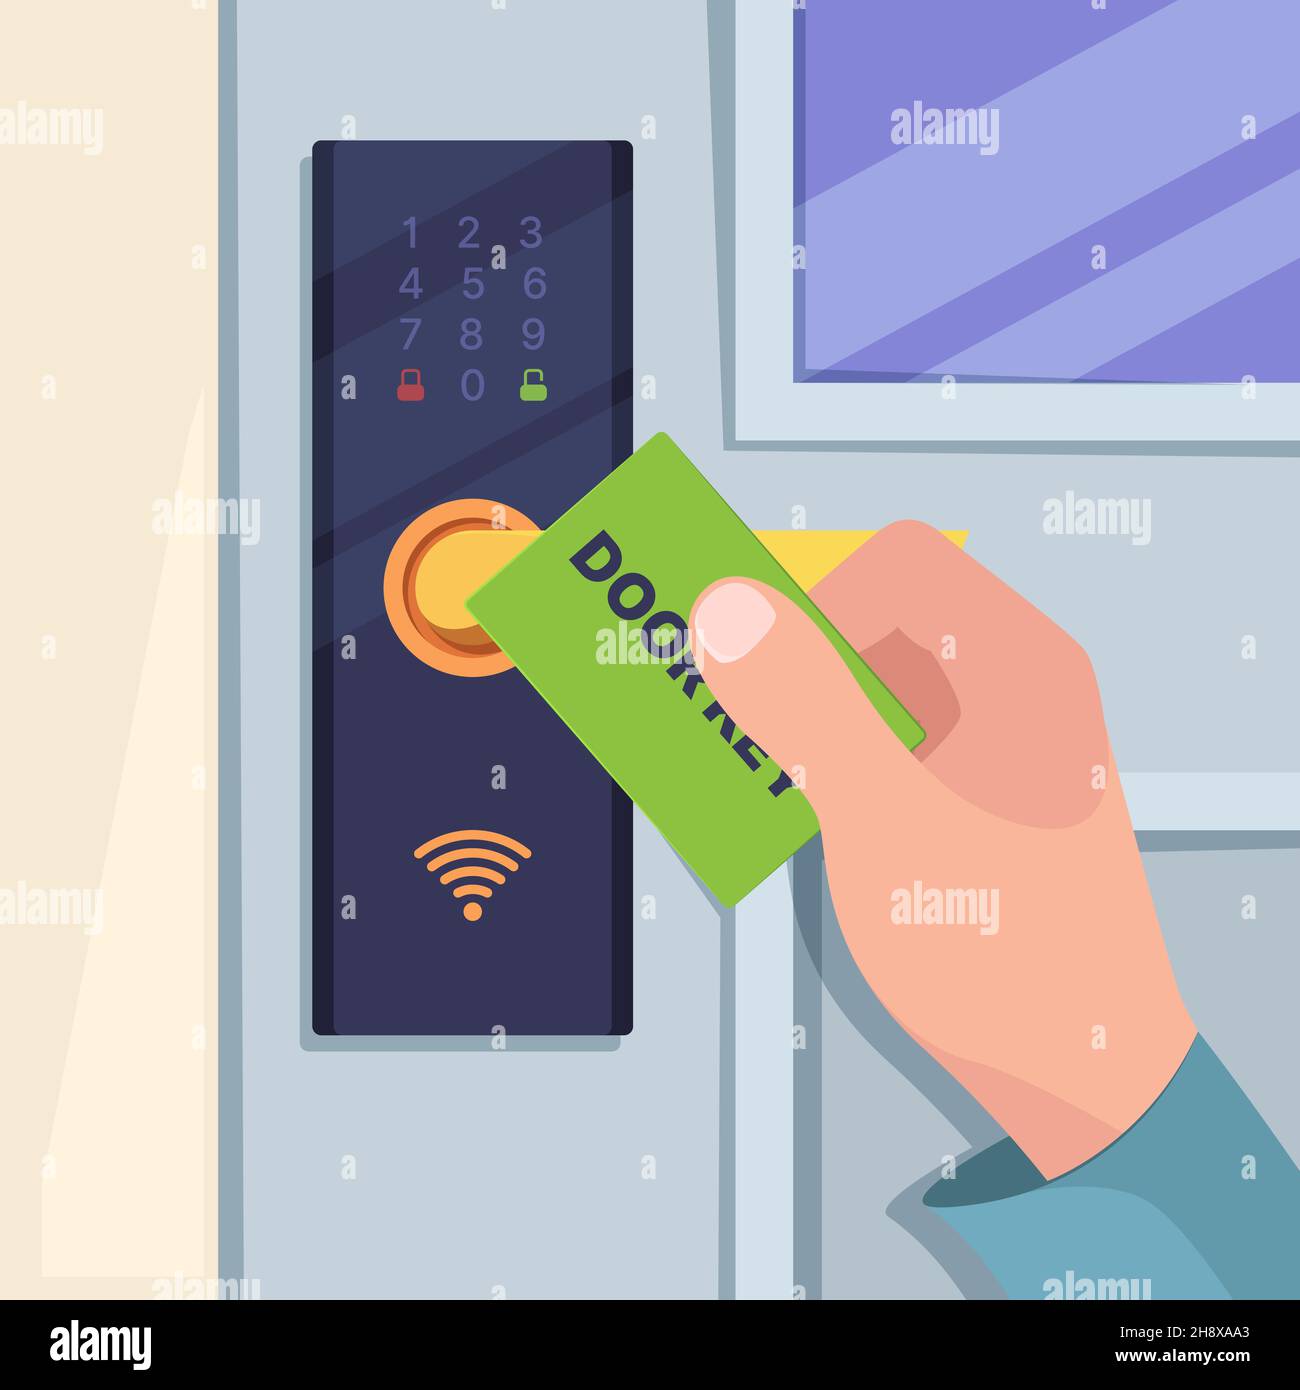 Digital card for handle door. Hand holding wireless card for smart electronic lock with sensor reader in hotel room key machine control system garish Stock Vector